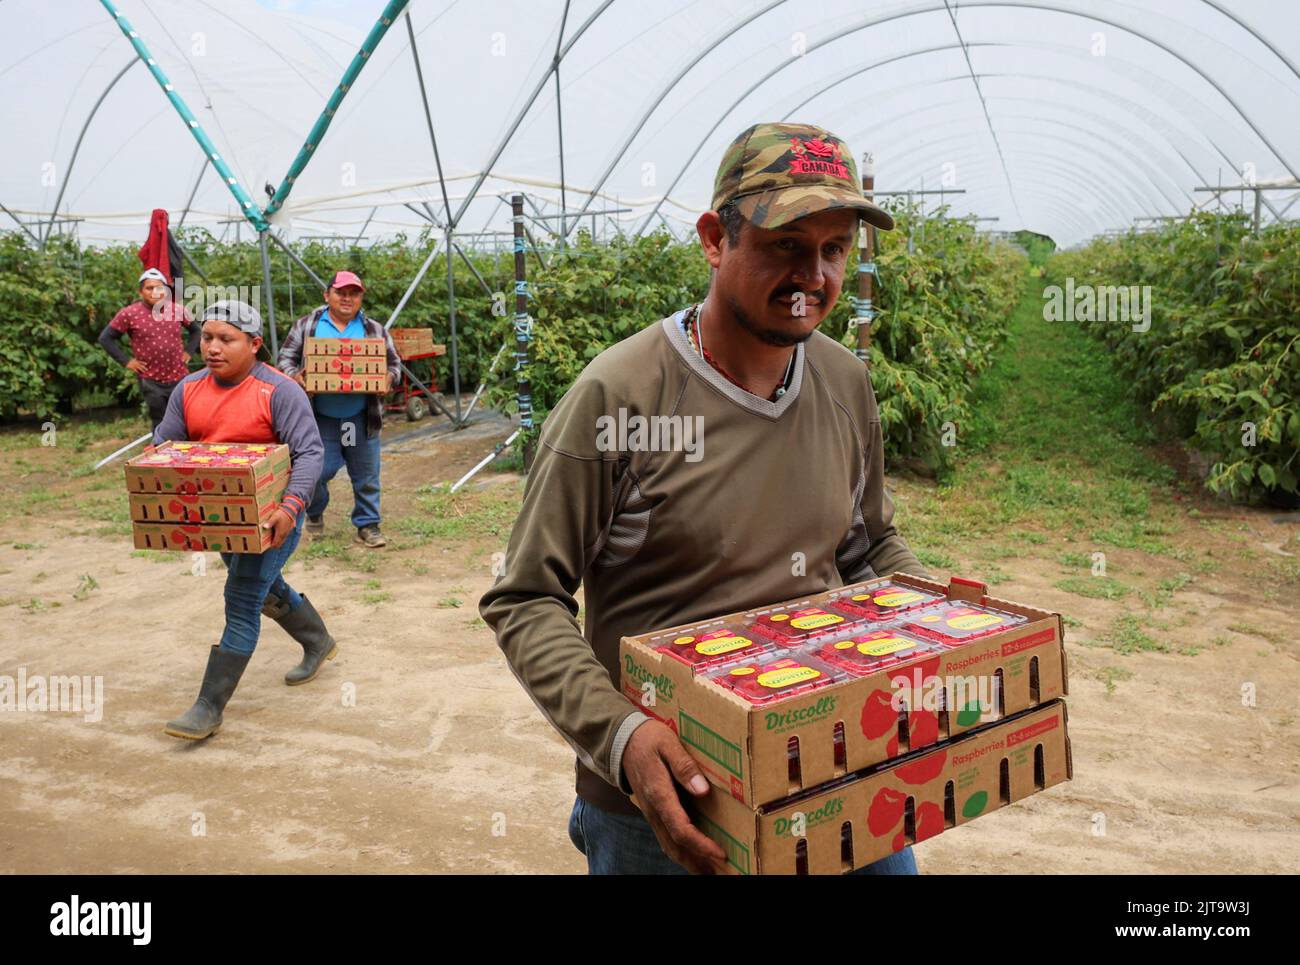 Workers carry picked raspberries at Masse, a berry farm operation in Saint Paul d'Abbotsford near Granby, Quebec, Canada August 11, 2022. REUTERS/Christinne Muschi Stock Photo